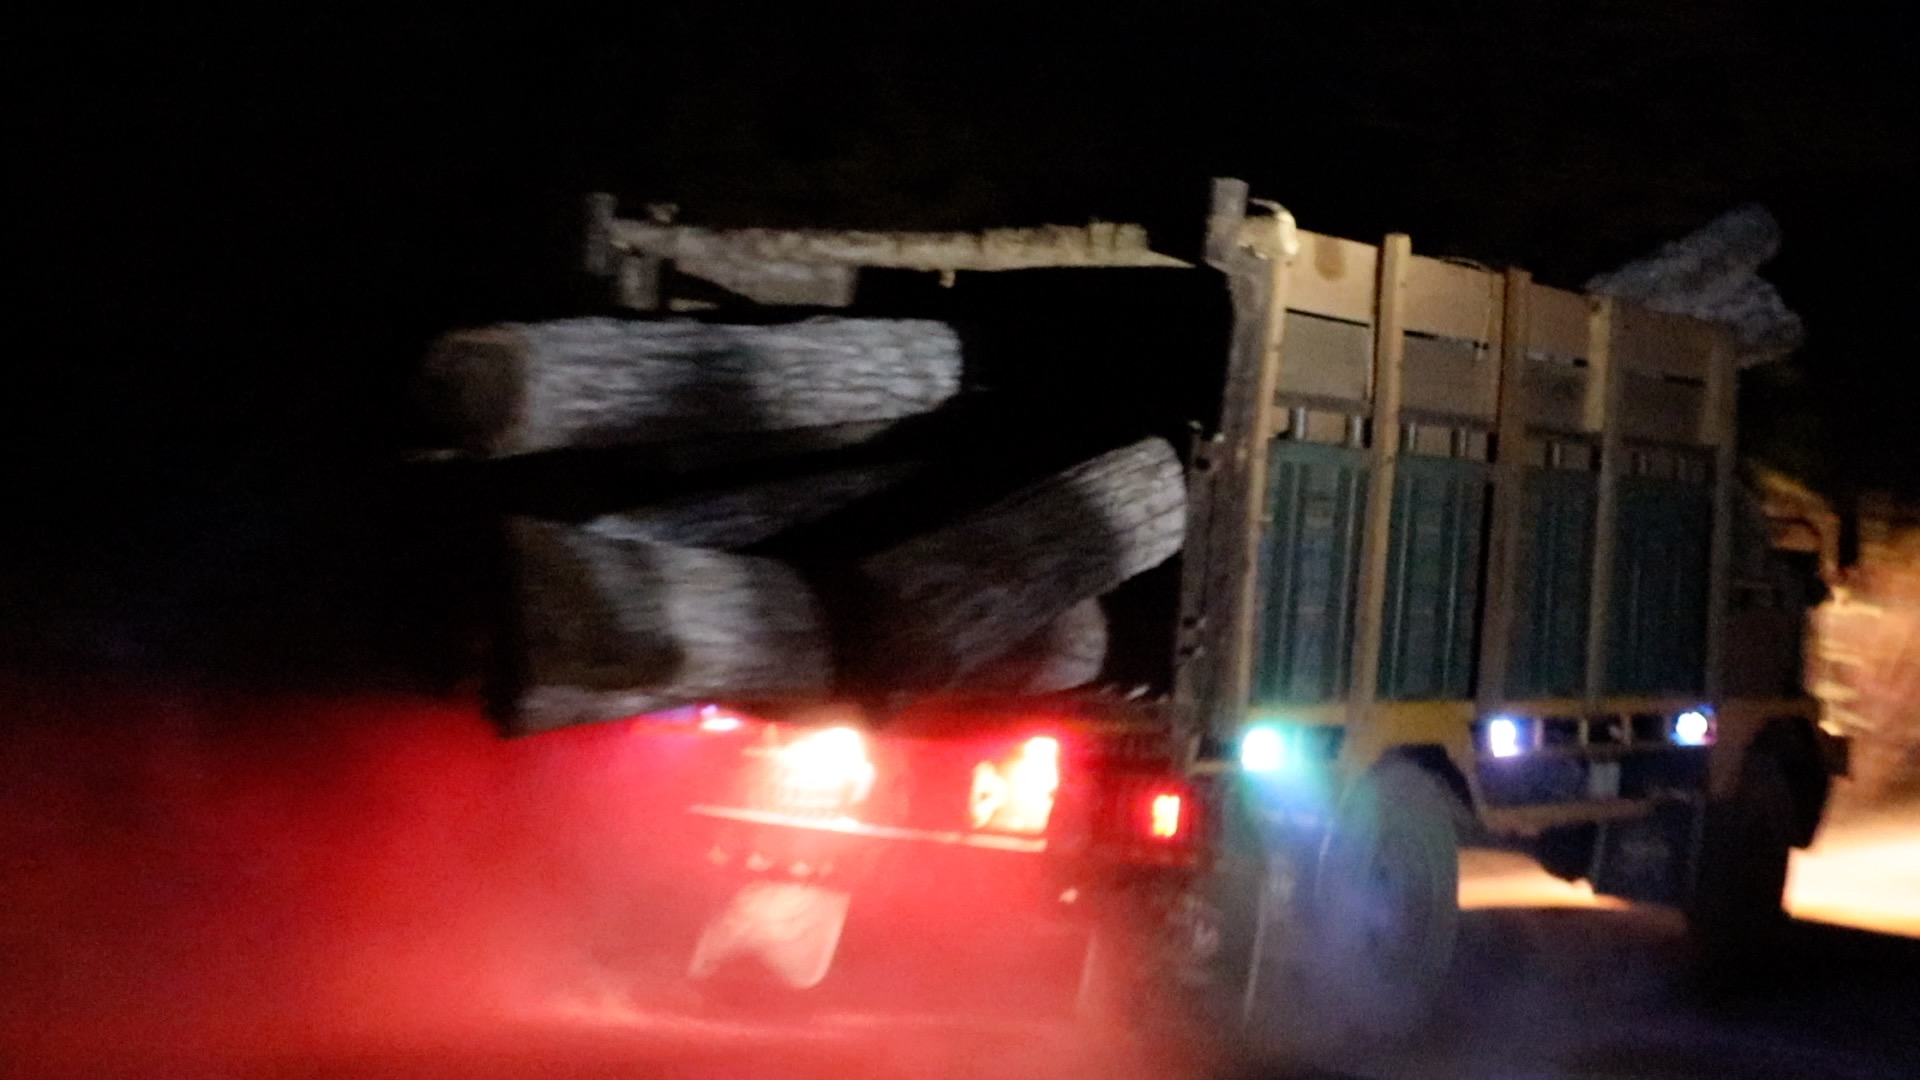 In March 2023, this timber truck was spotted transporting what appear to be logs illegally harvested from Prey Lang Wildlife Sanctuary to Think Biotech's concession. Image by Ma Chettra.